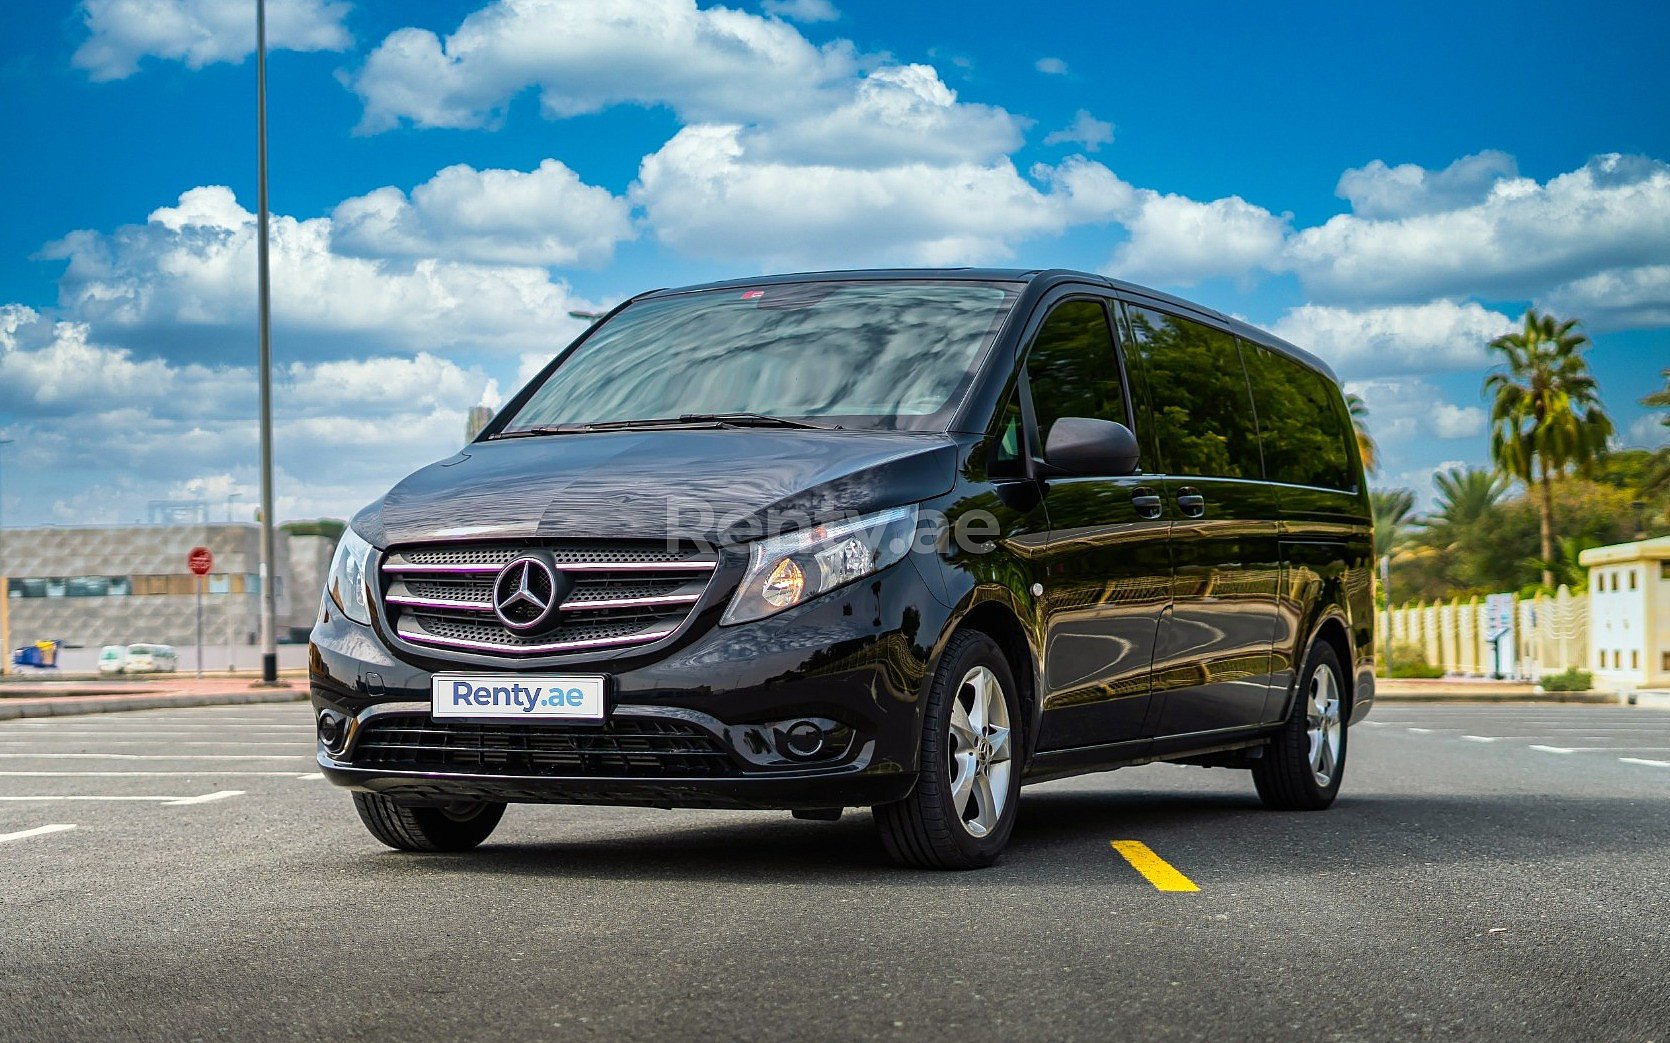 Now to rent Mercedes Viano airport transfer service in Dubai